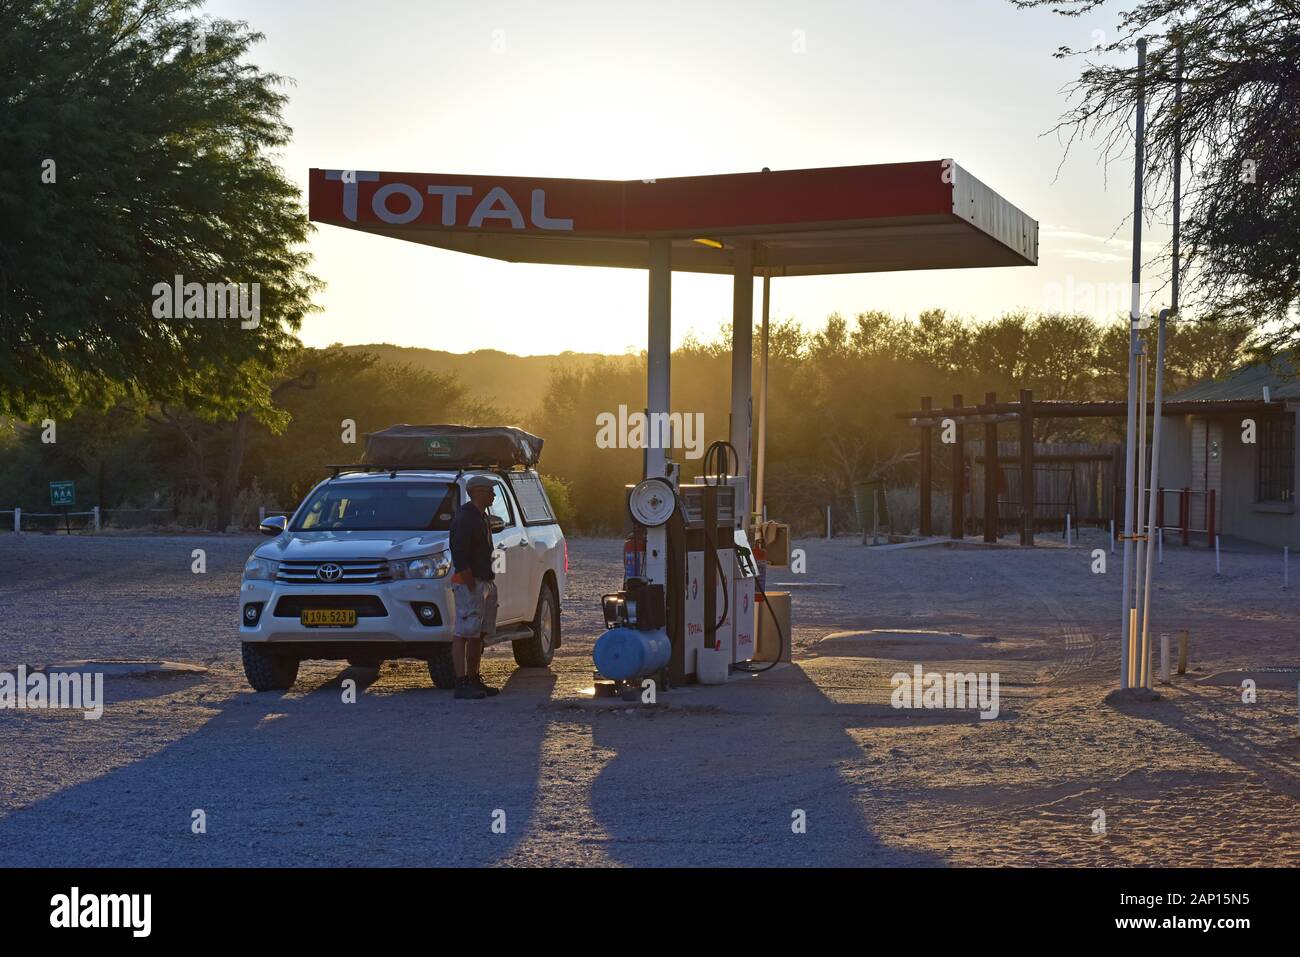 In the early morning, an off-road vehicle in the Kgalagadi Transfrontier National Park is refueled in an off-road vehicle, taken on 24.02.2019. The Kgalagadi Transfrontier National Park was created in 1999 by merging the South African Kalahari-Gemsbok National Park and the Gemsbok National Park in Botswana and is a cross-border nature reserve in the Kalahari Desert with an area of around 38,000 square kilometers. The park is particularly known for its lions, which can often be found there, but also for numerous other wild animals that live here. Photo: Matthias Toedt / dpa-Zentralbild / ZB / P Stock Photo